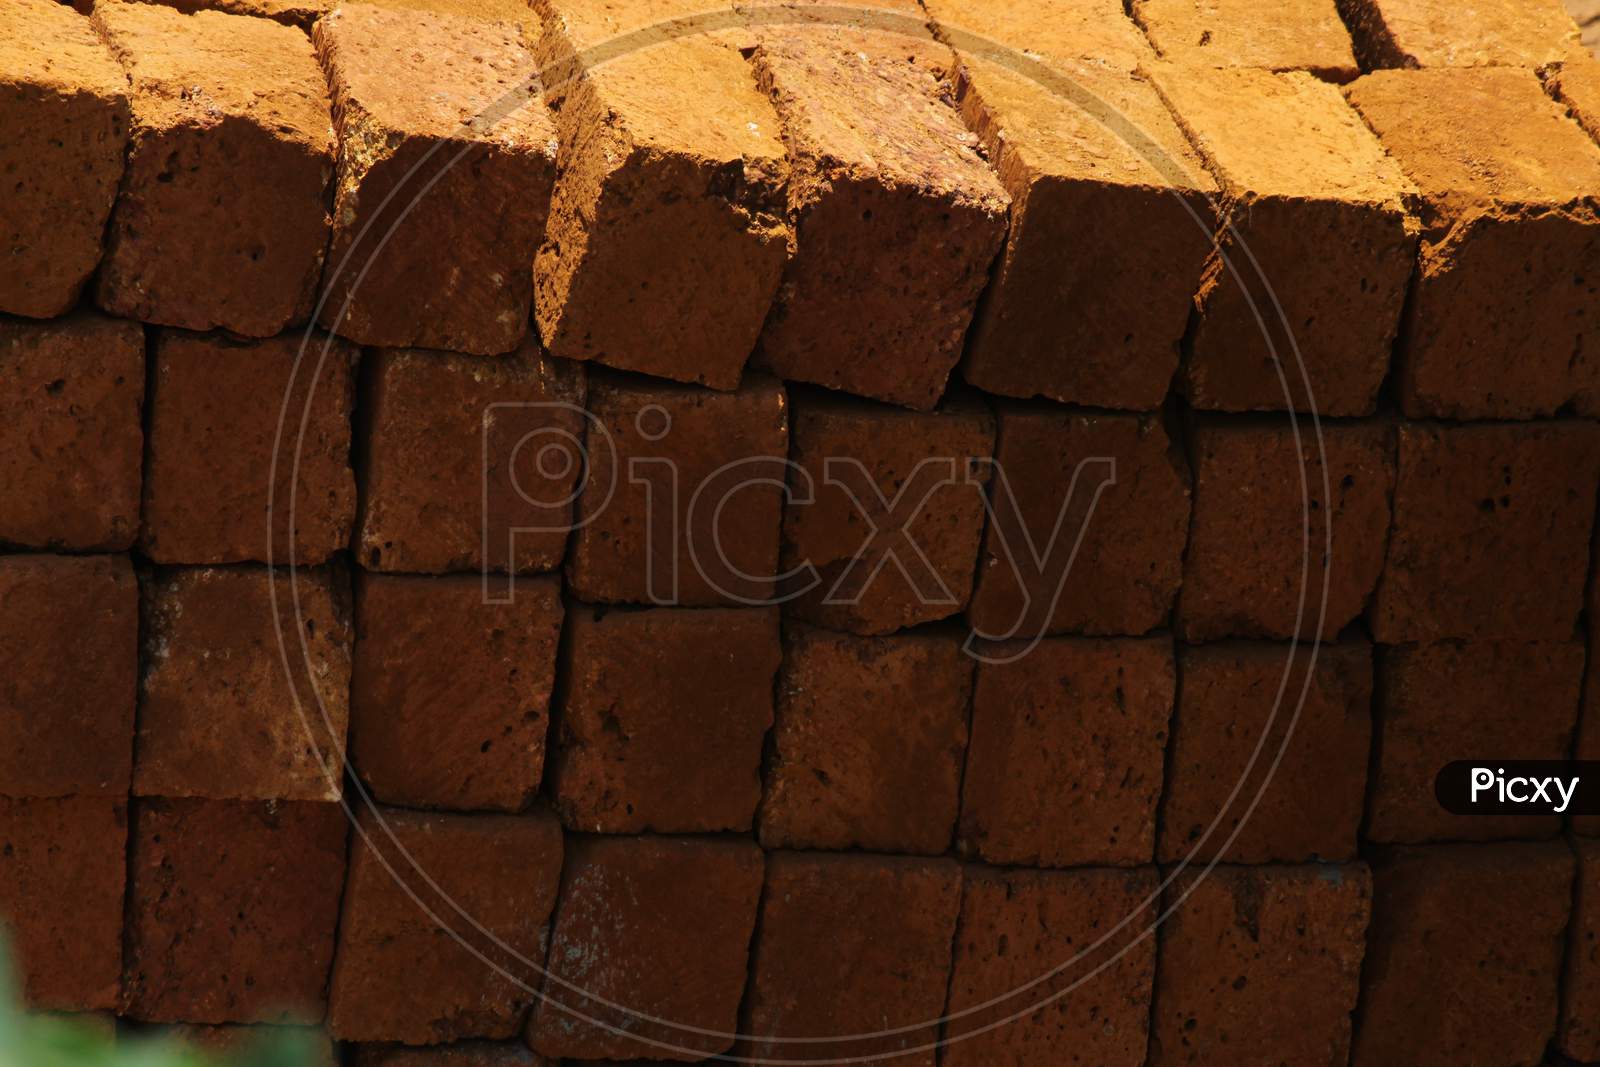 Red Laterite Stones For Constructions